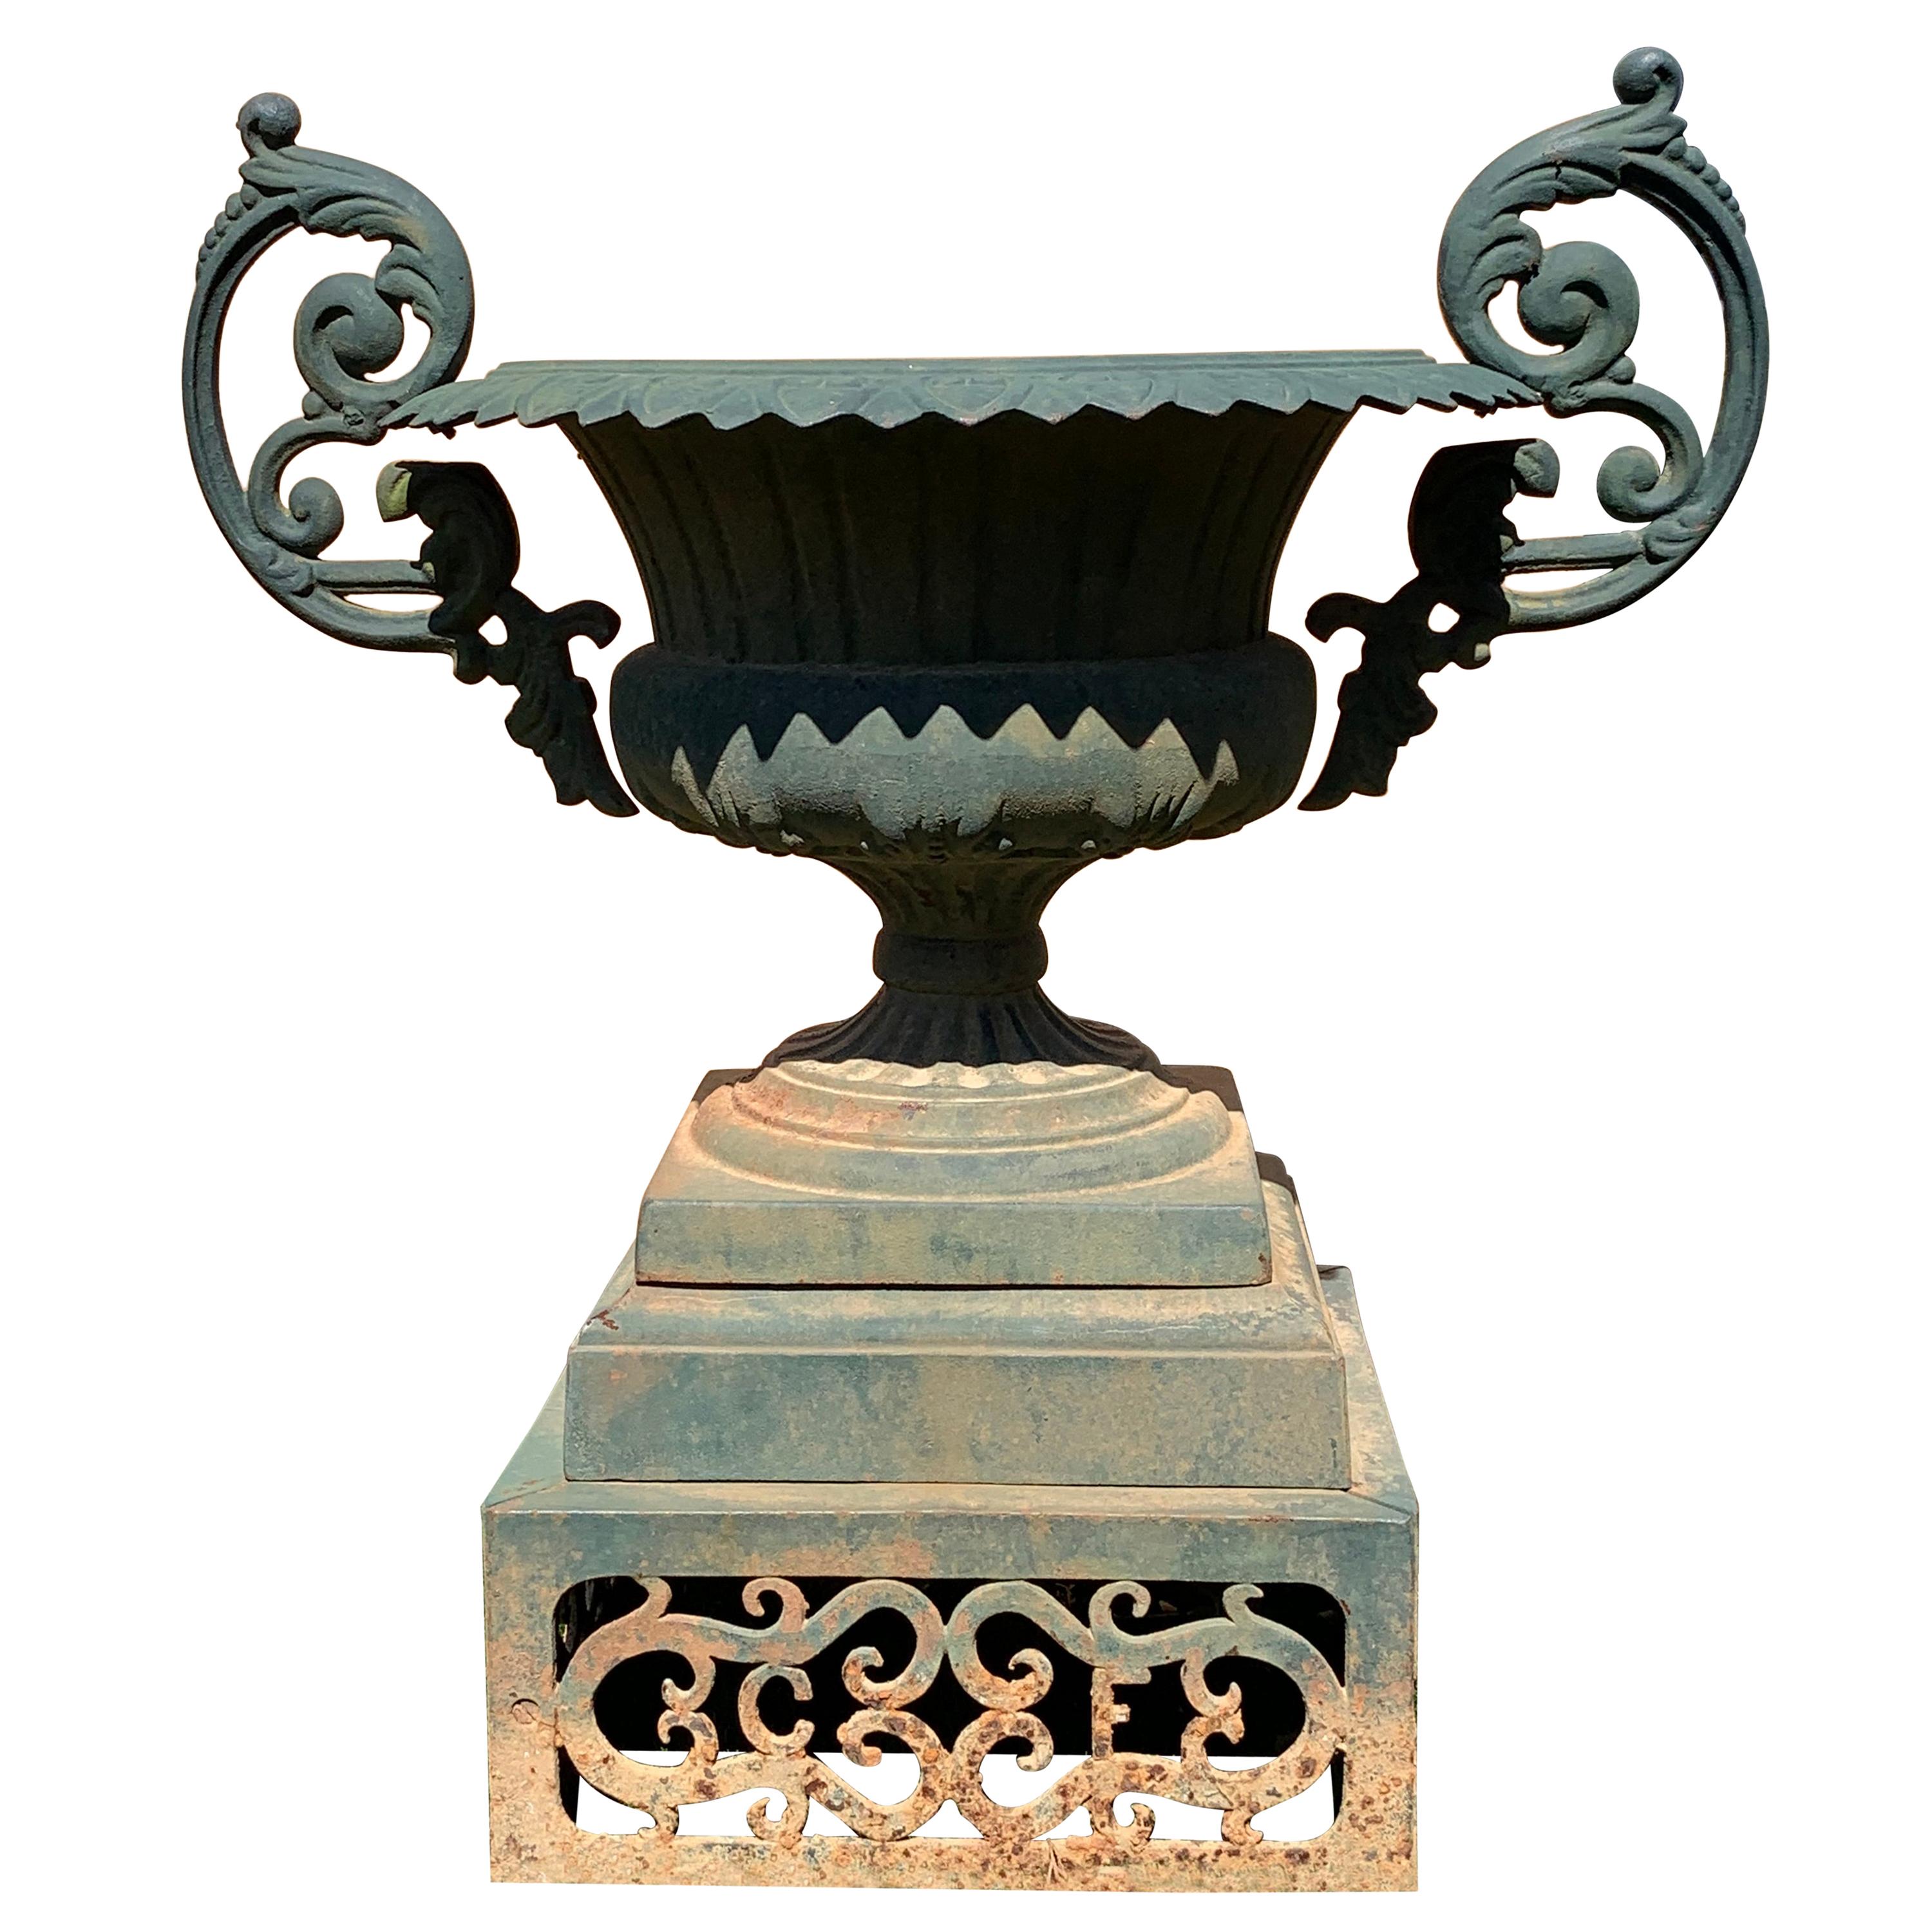 Garden Beauty of an Urn with Gorgeous Verdigris Patina and Fancy Handles